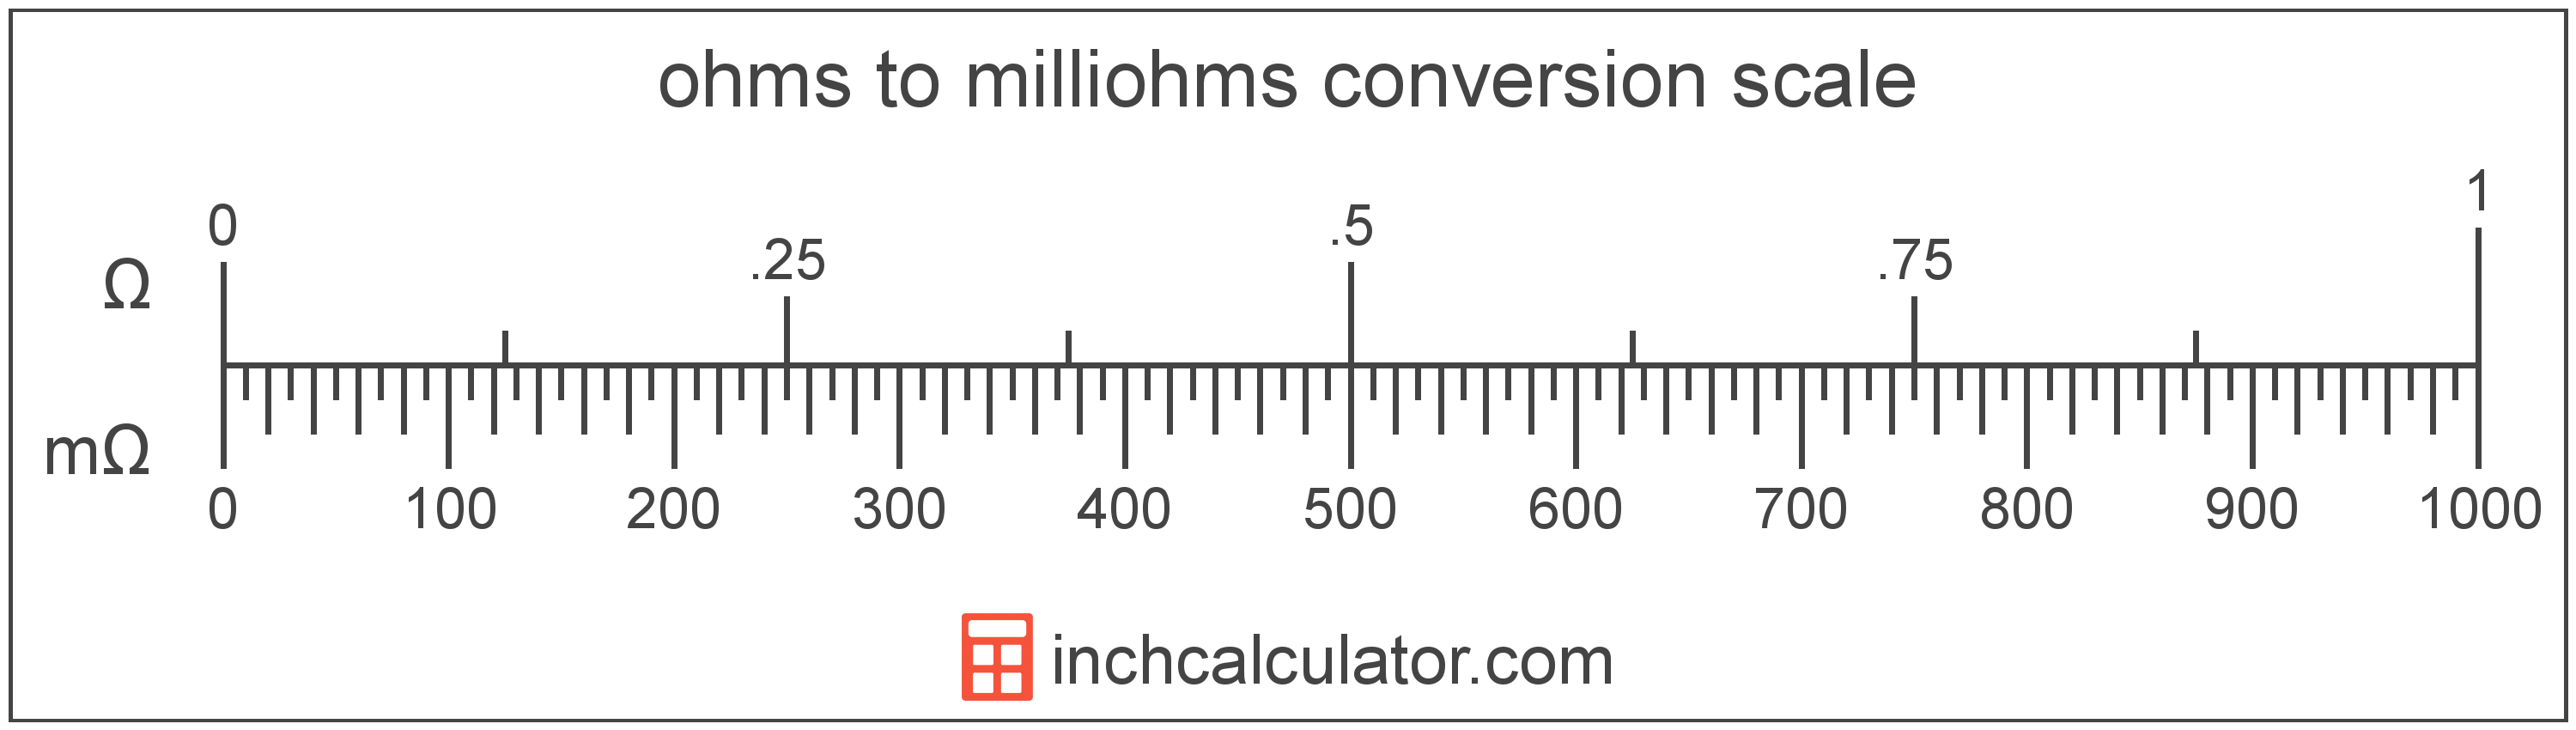 conversion scale showing milliohms and equivalent ohms electrical resistance values